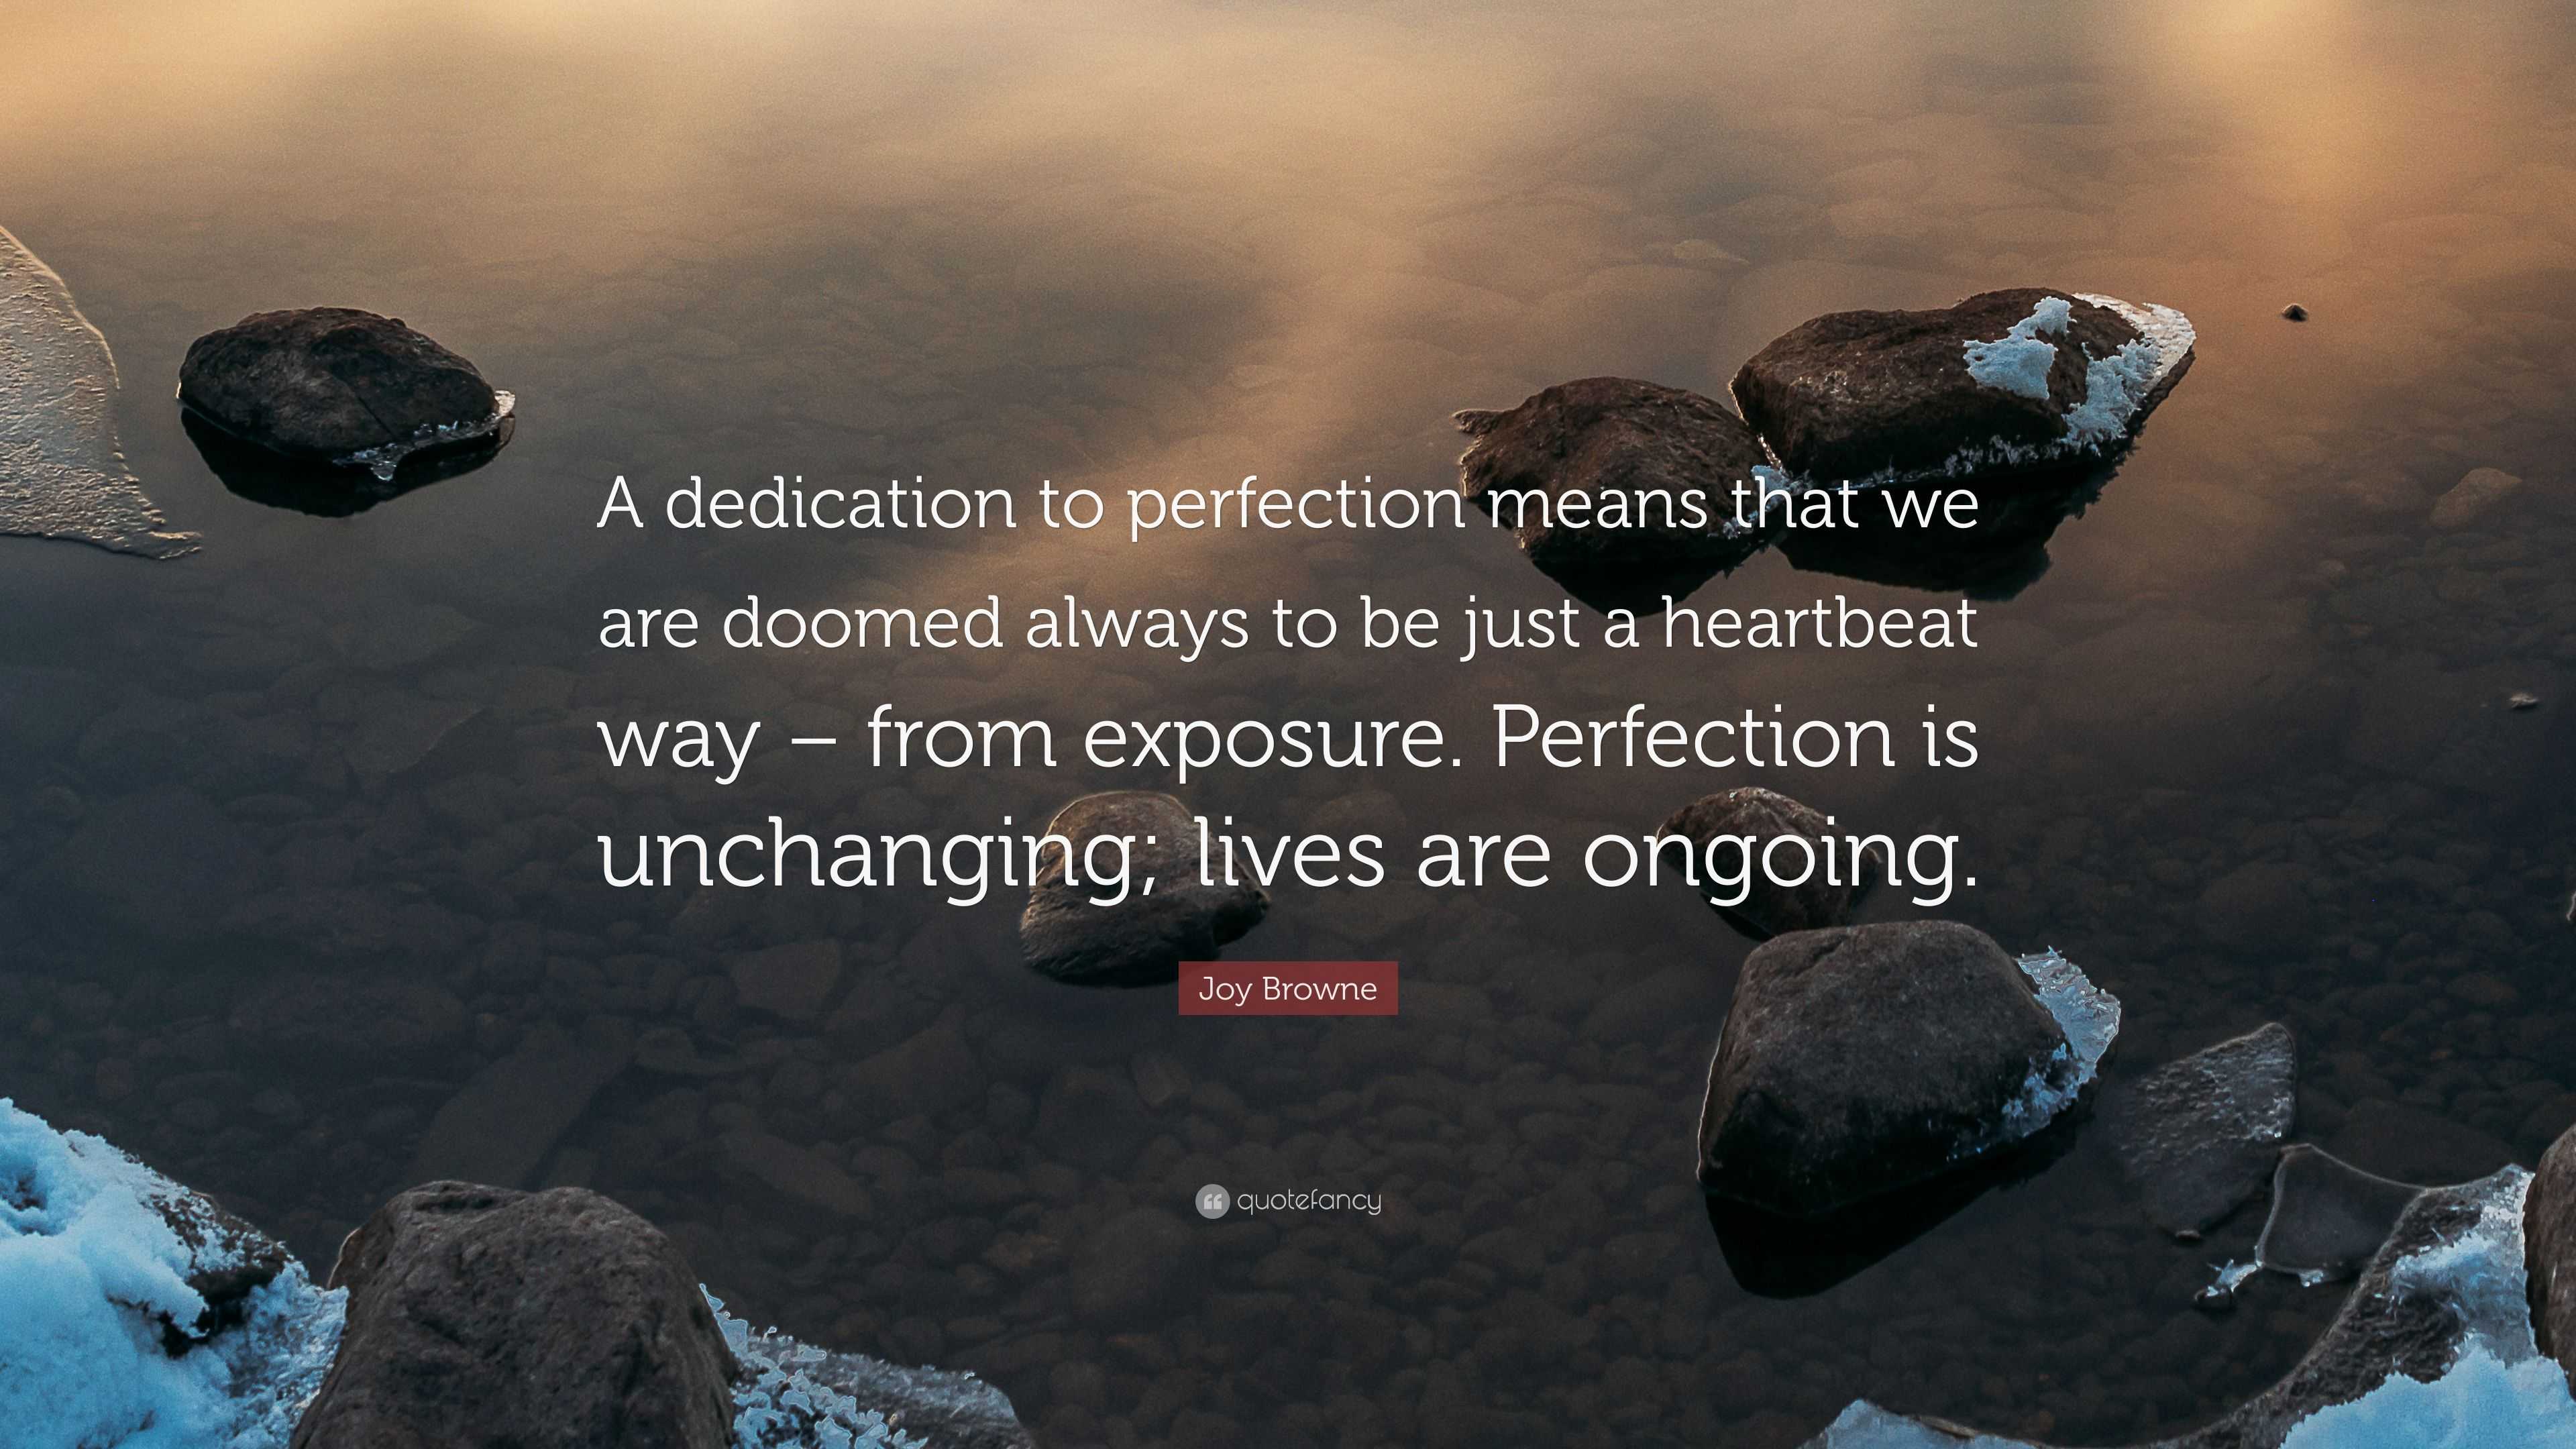 Joy Browne Quote: “A dedication to perfection means that we are